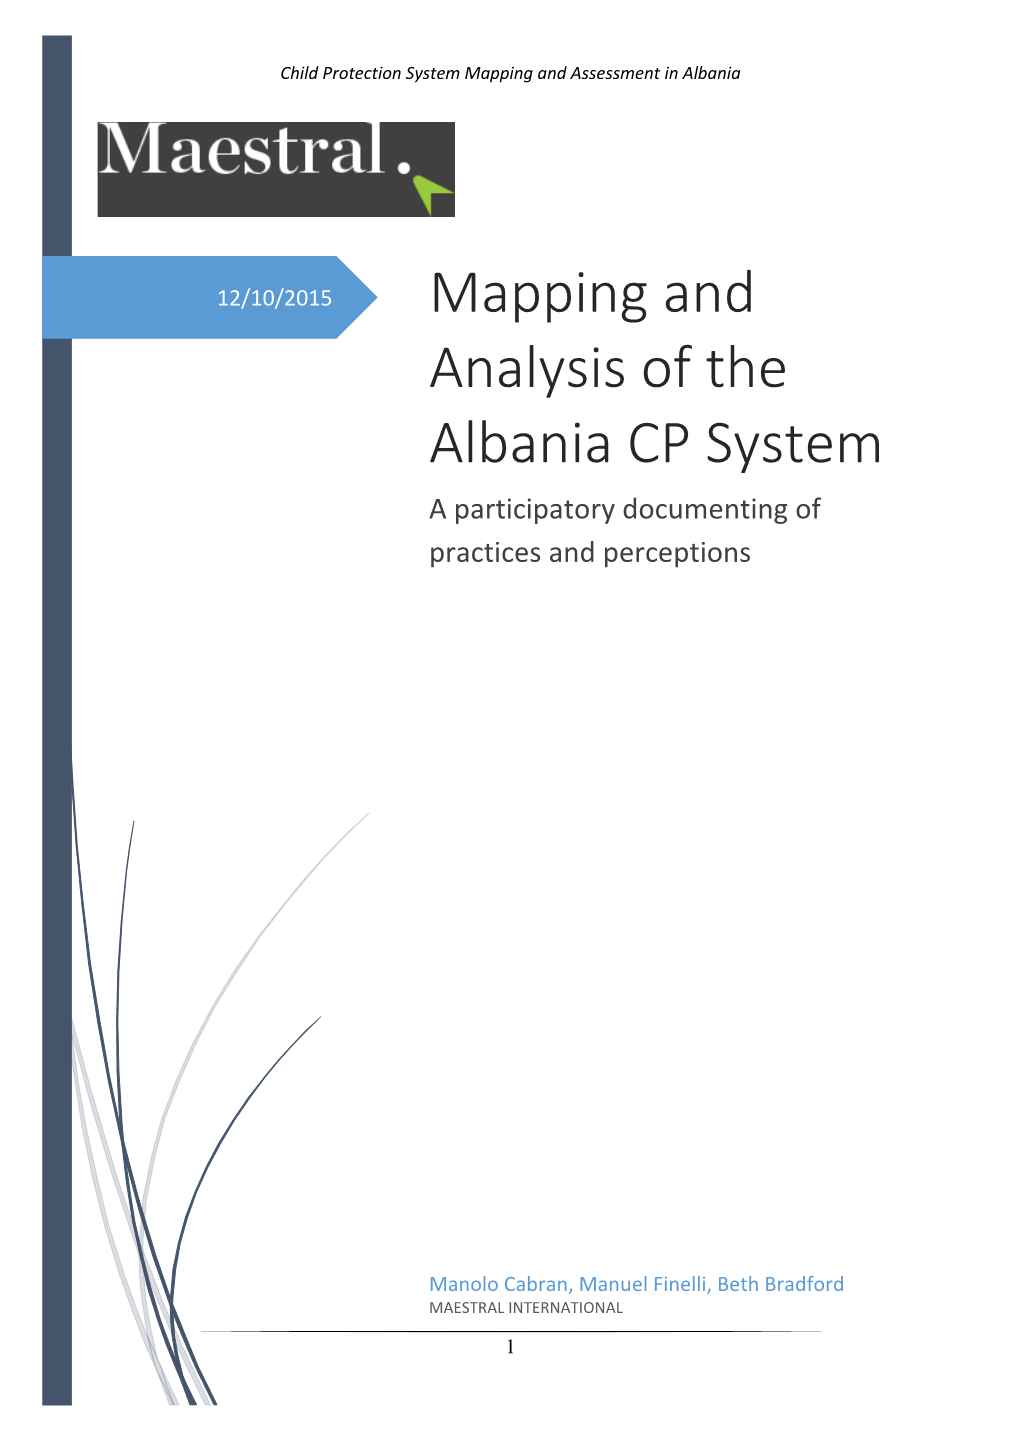 Mapping and Analysis of the Albania CP System a Participatory Documenting of Practices and Perceptions